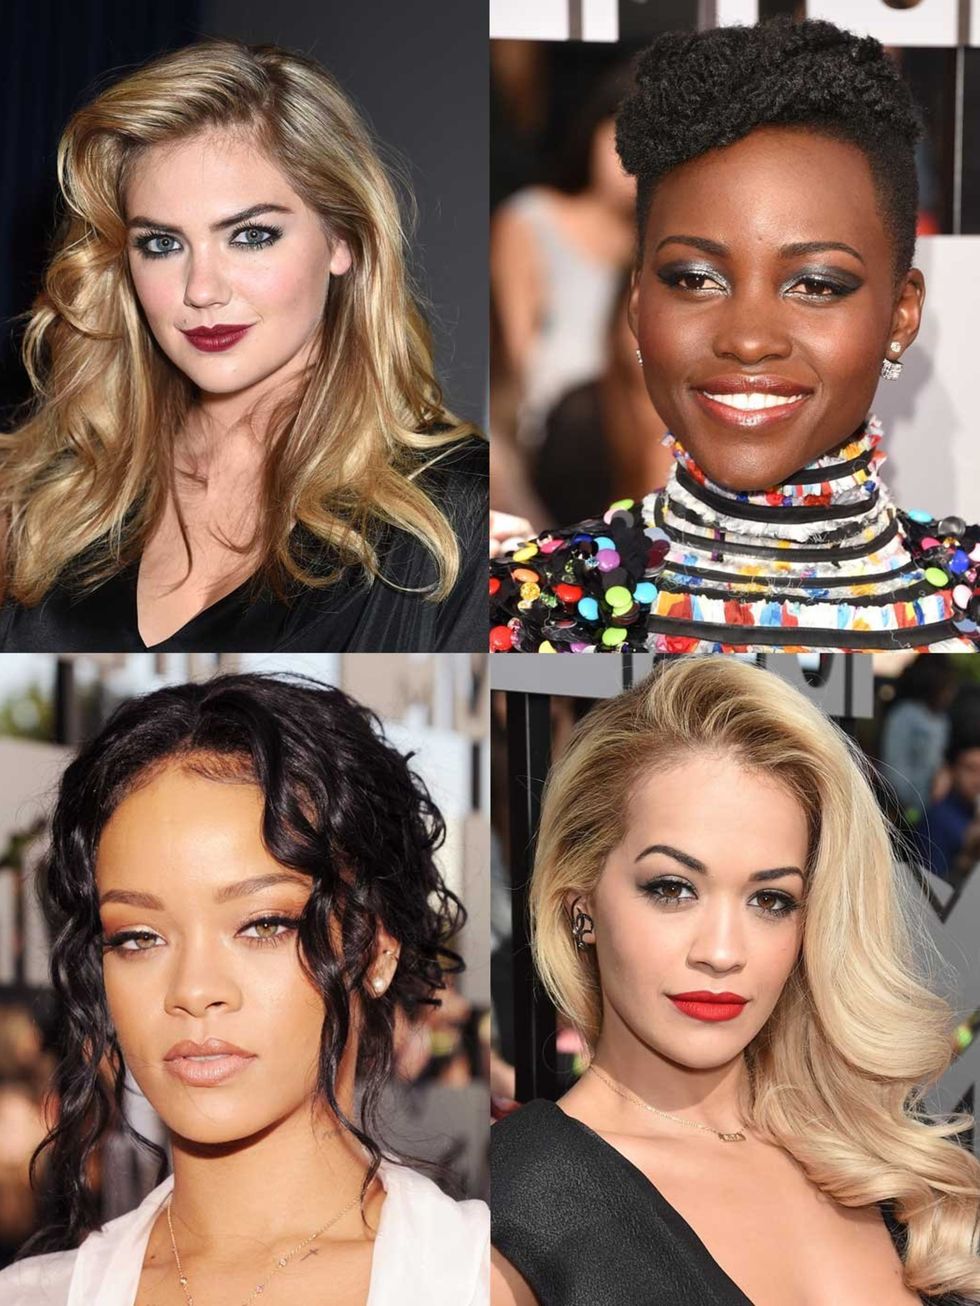 &lt;p&gt;Side partings reigned supreme as the hairstyle of the night at the MTV Movie Awards with Kate Upton, Rita Ora and Jessica Alba combing the part of choice with retro waves. While Ellie, Shailene and Iggy went for a modern take with textured ends, 